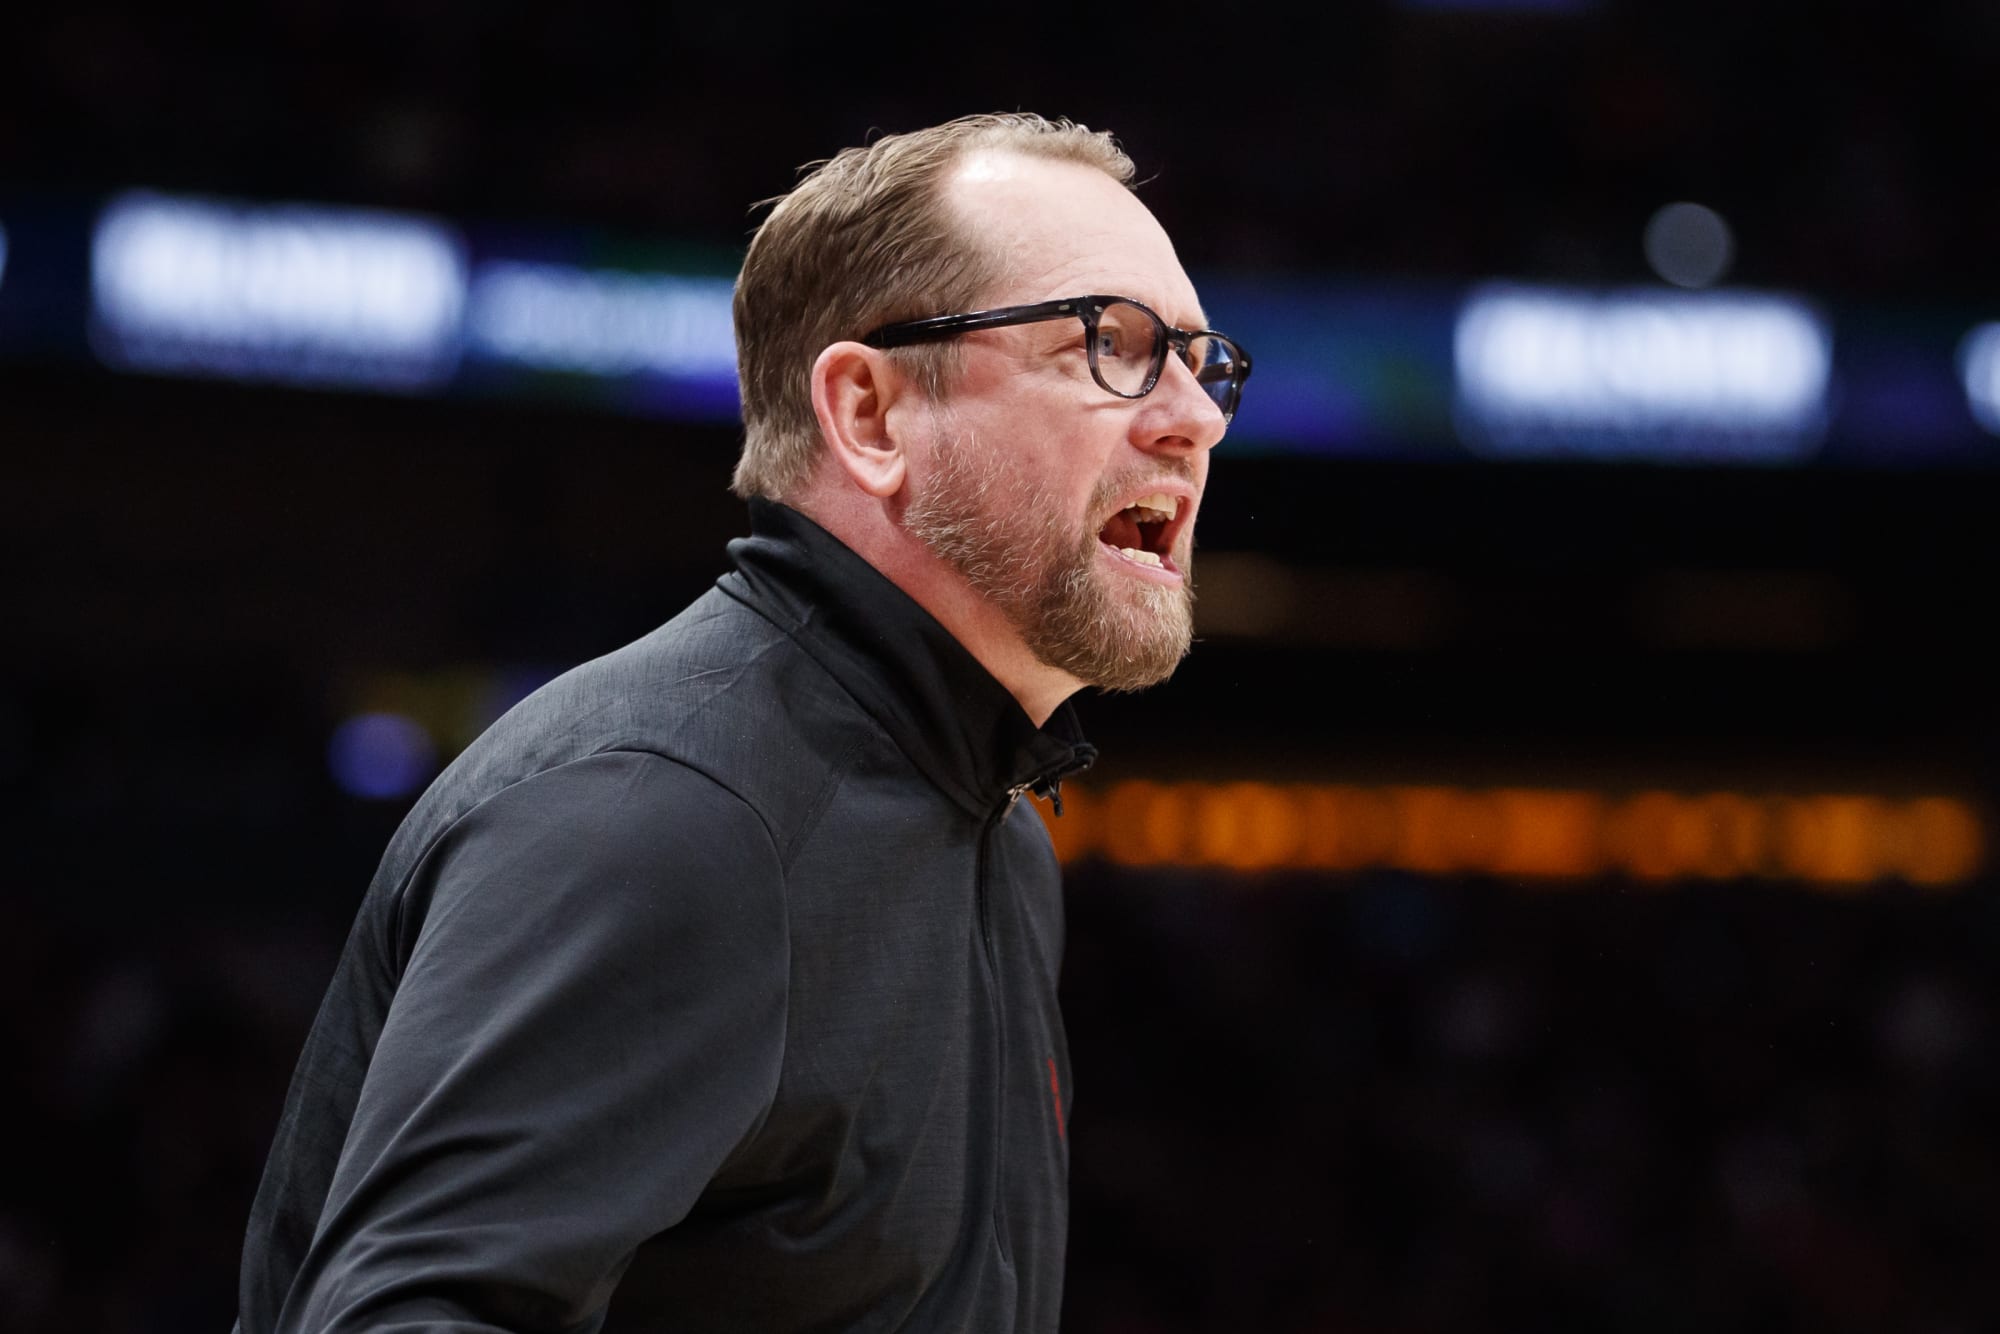 Was Raptors’ Nick Nurse disrespected in Coach of the Year voting?